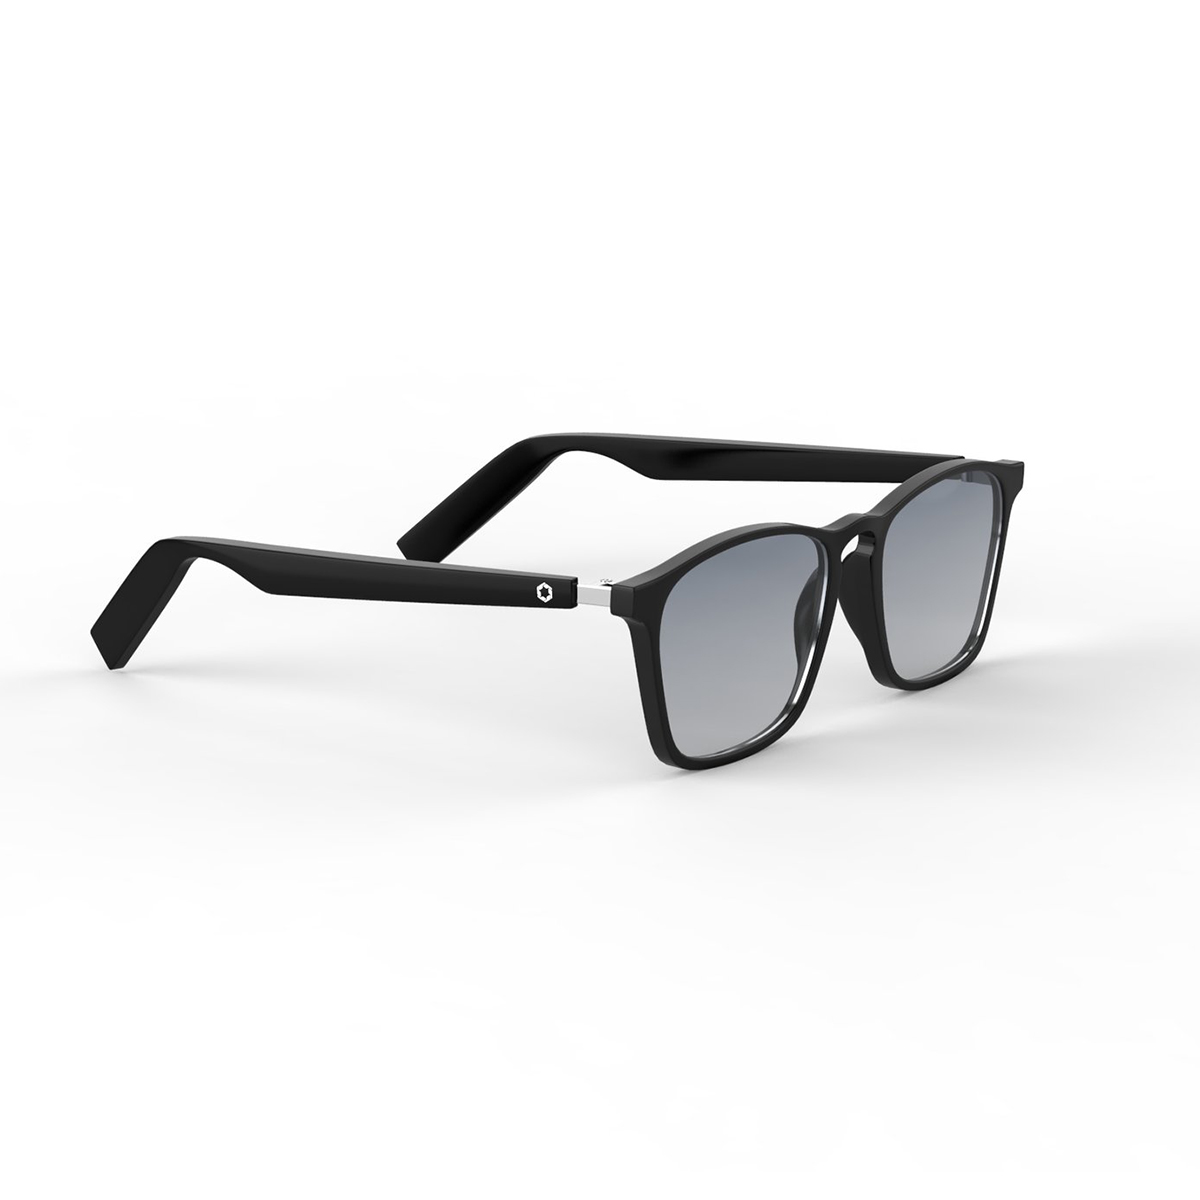 Lucyd Bluetooth Wayfarer Sunglasses, , large image number null